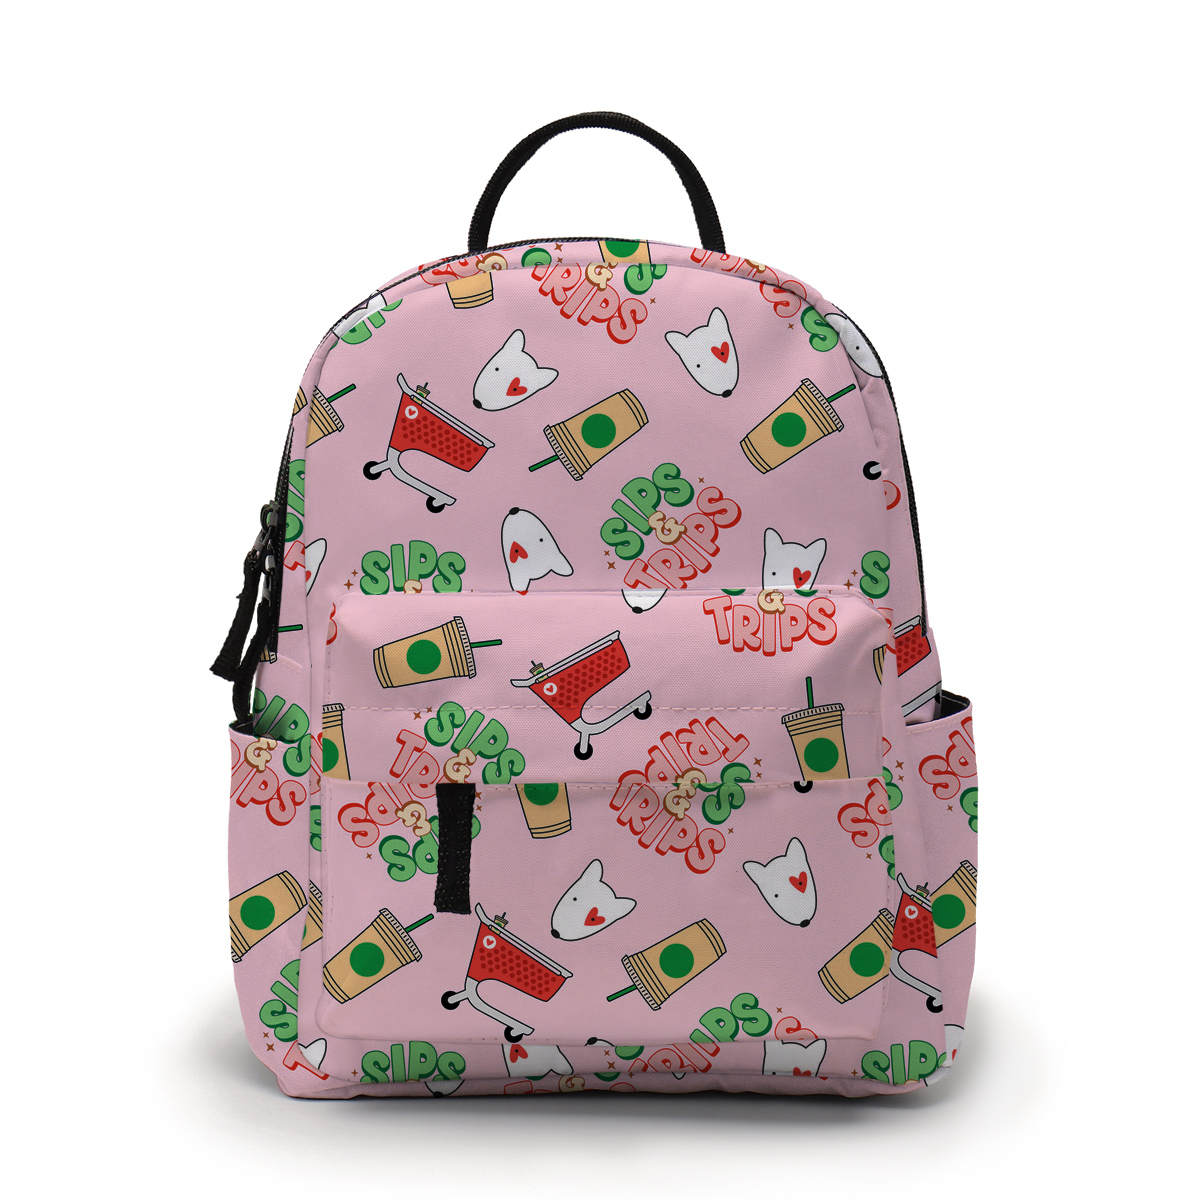 Mini Backpack - Sips & Trips Pink - Three Bears Boutique